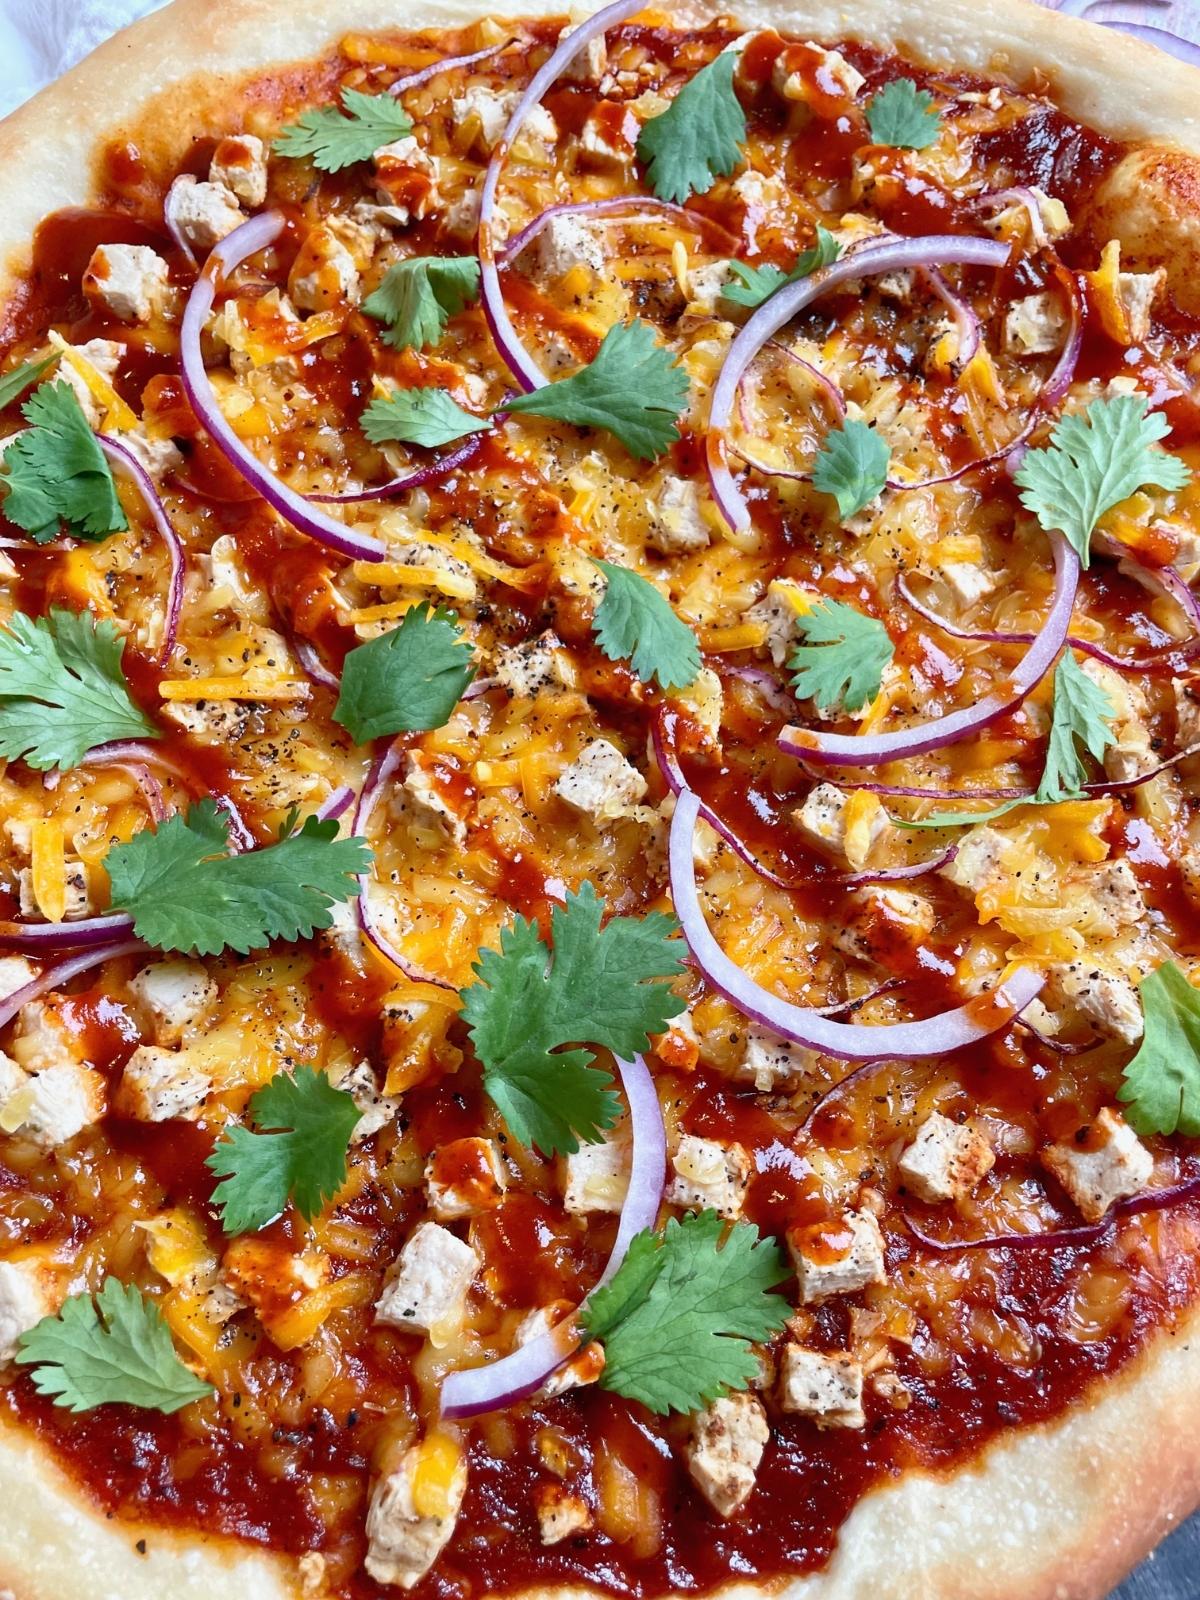 Closer view of bbq pizza.